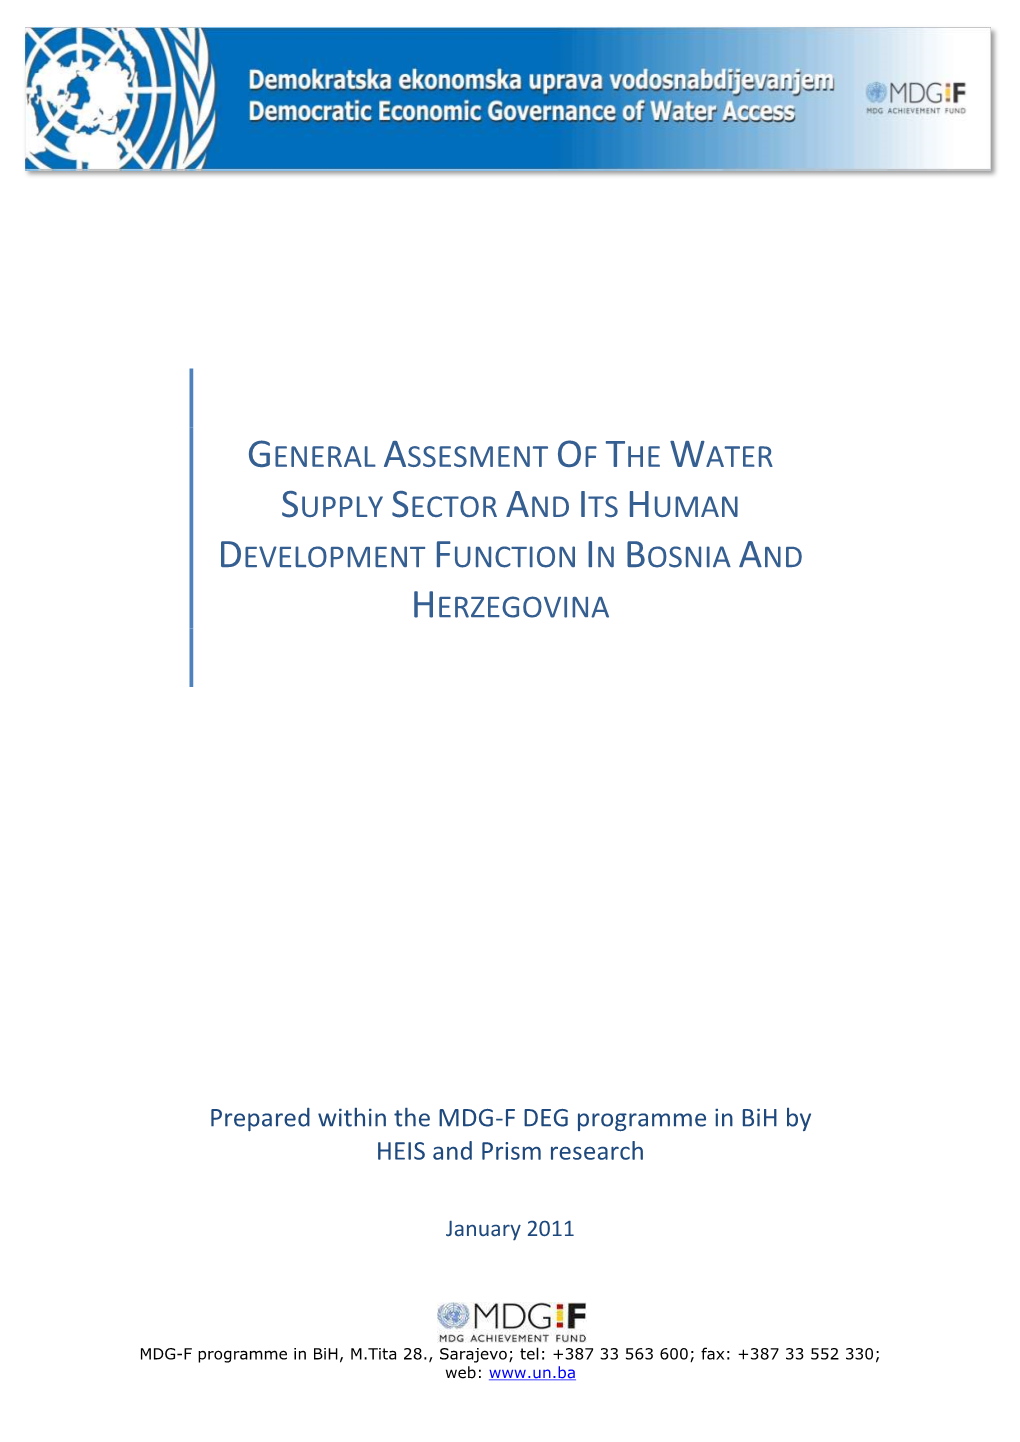 General Assesment of the Water Supply Sector and Its Human Development Function in Bosnia and Herzegovina